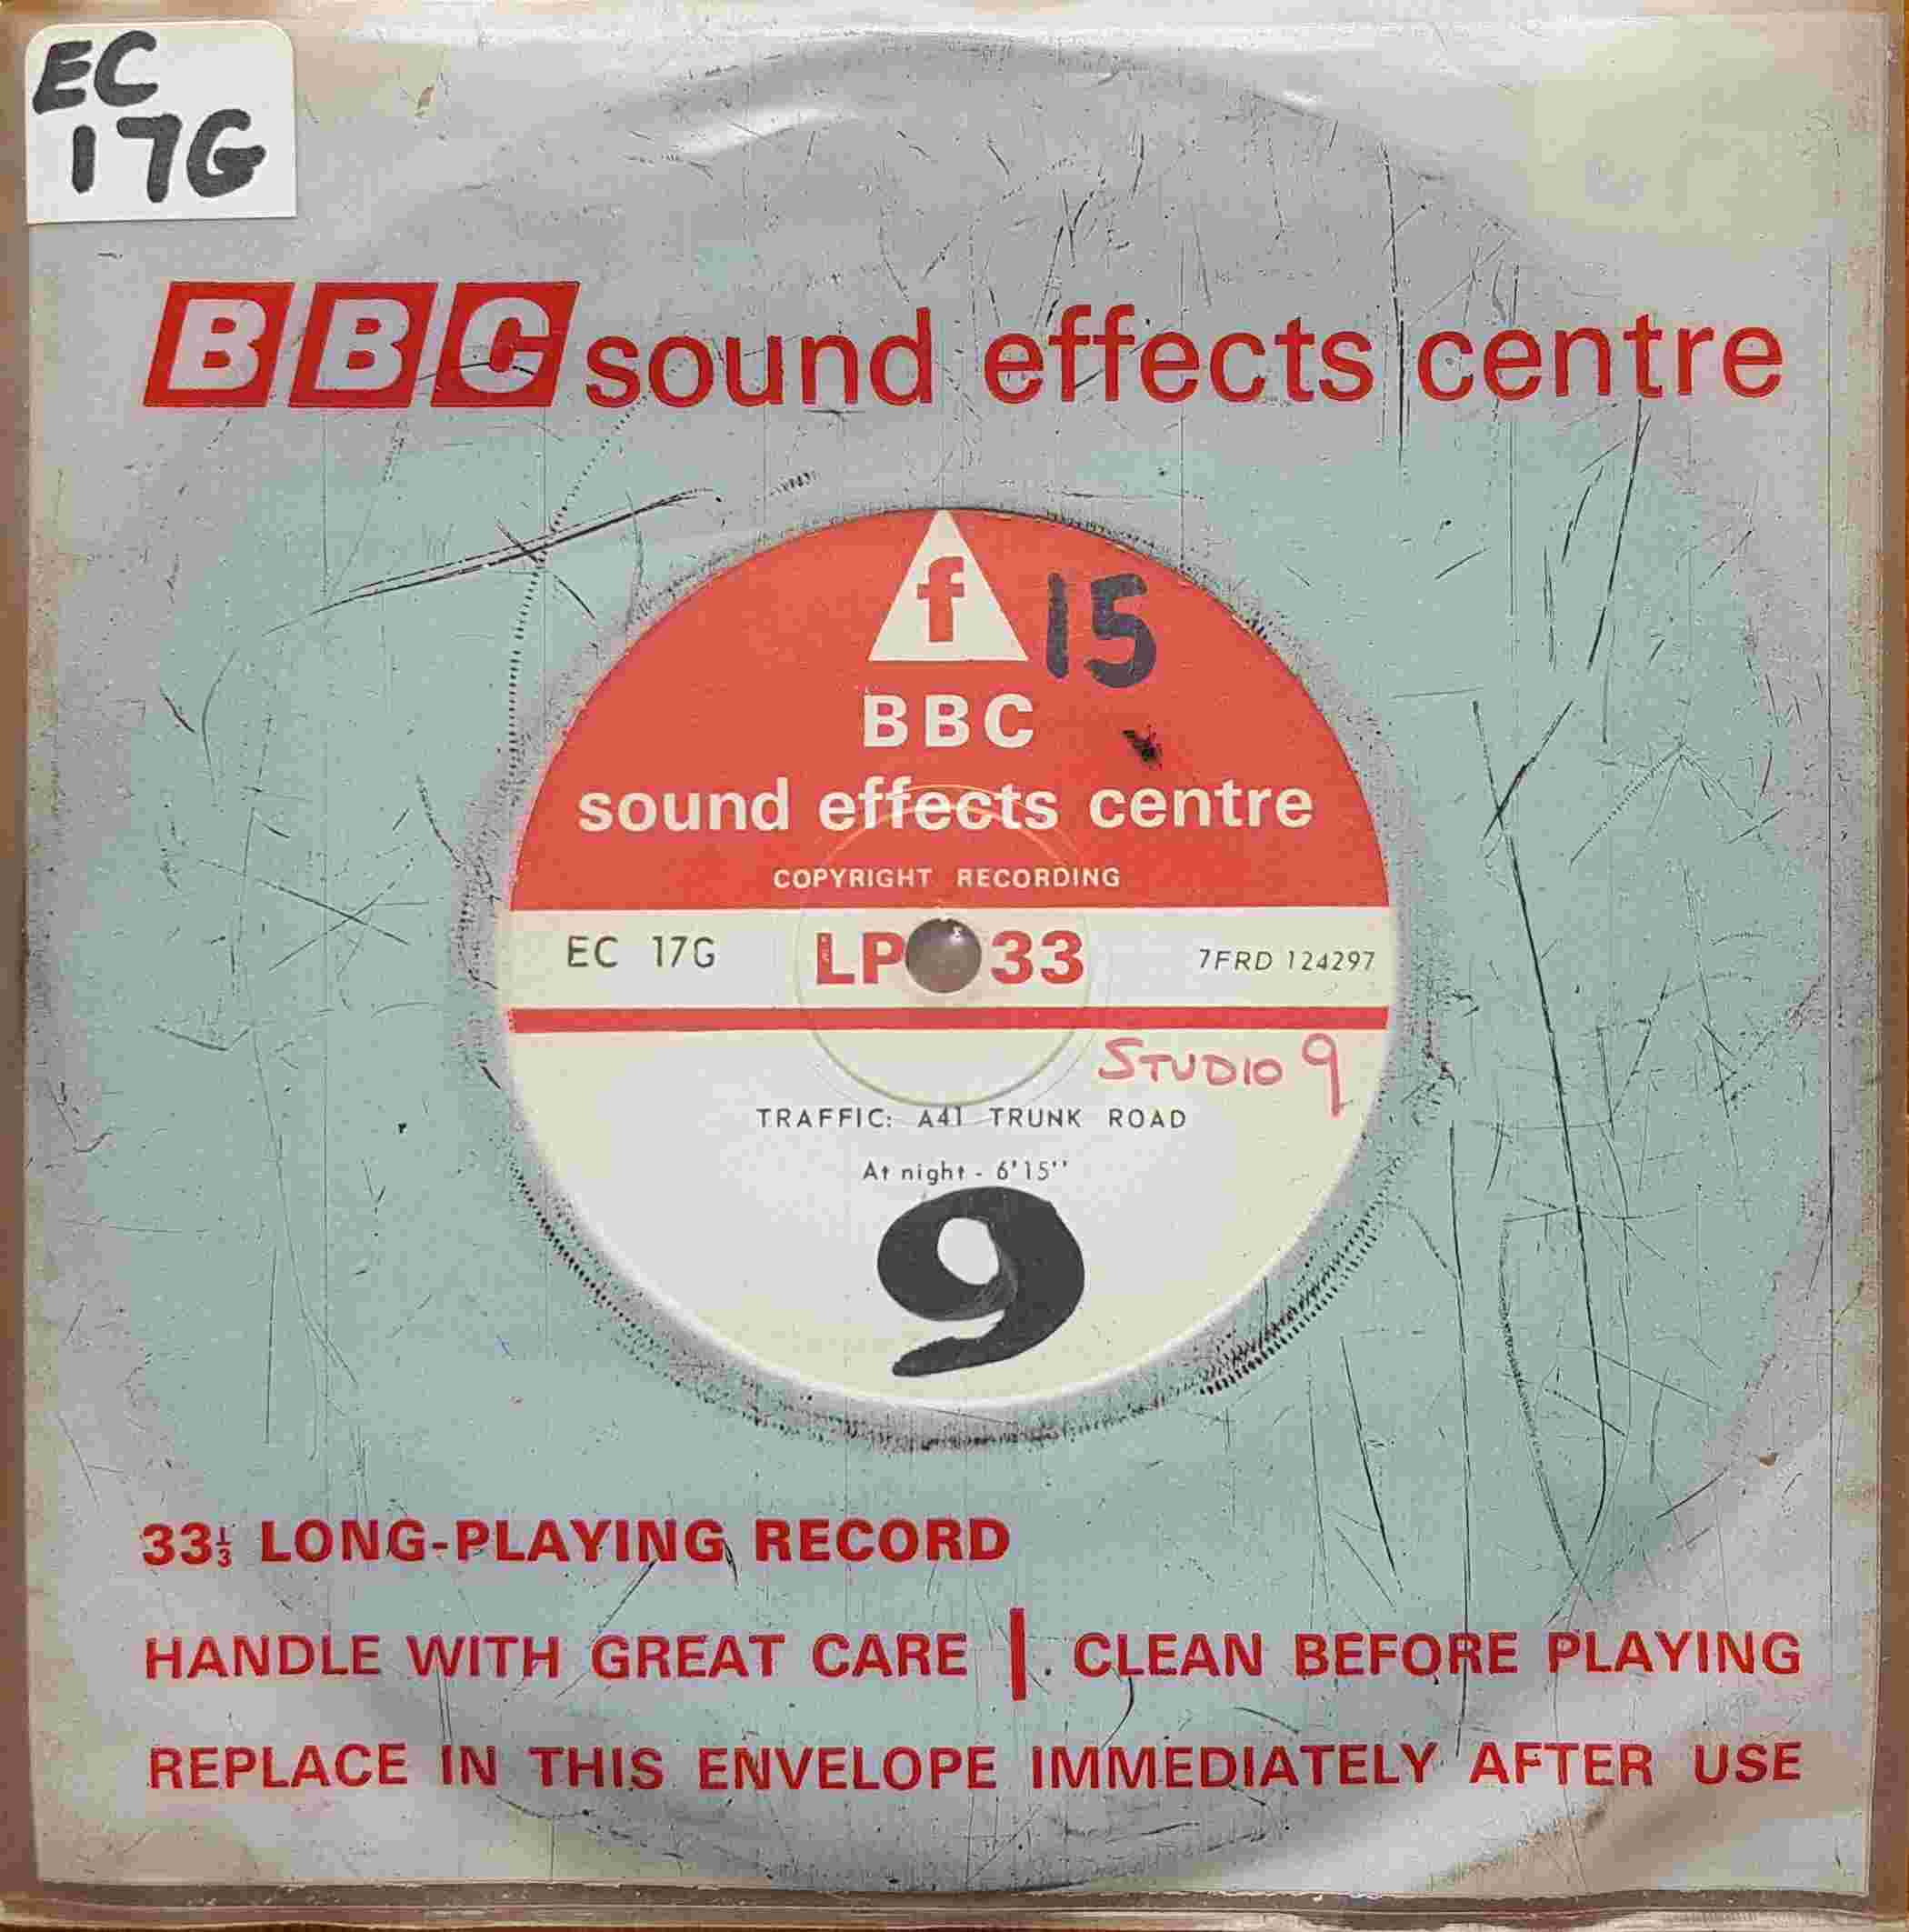 Picture of EC 17G Traffic: A41 trunk road by artist Not registered from the BBC records and Tapes library